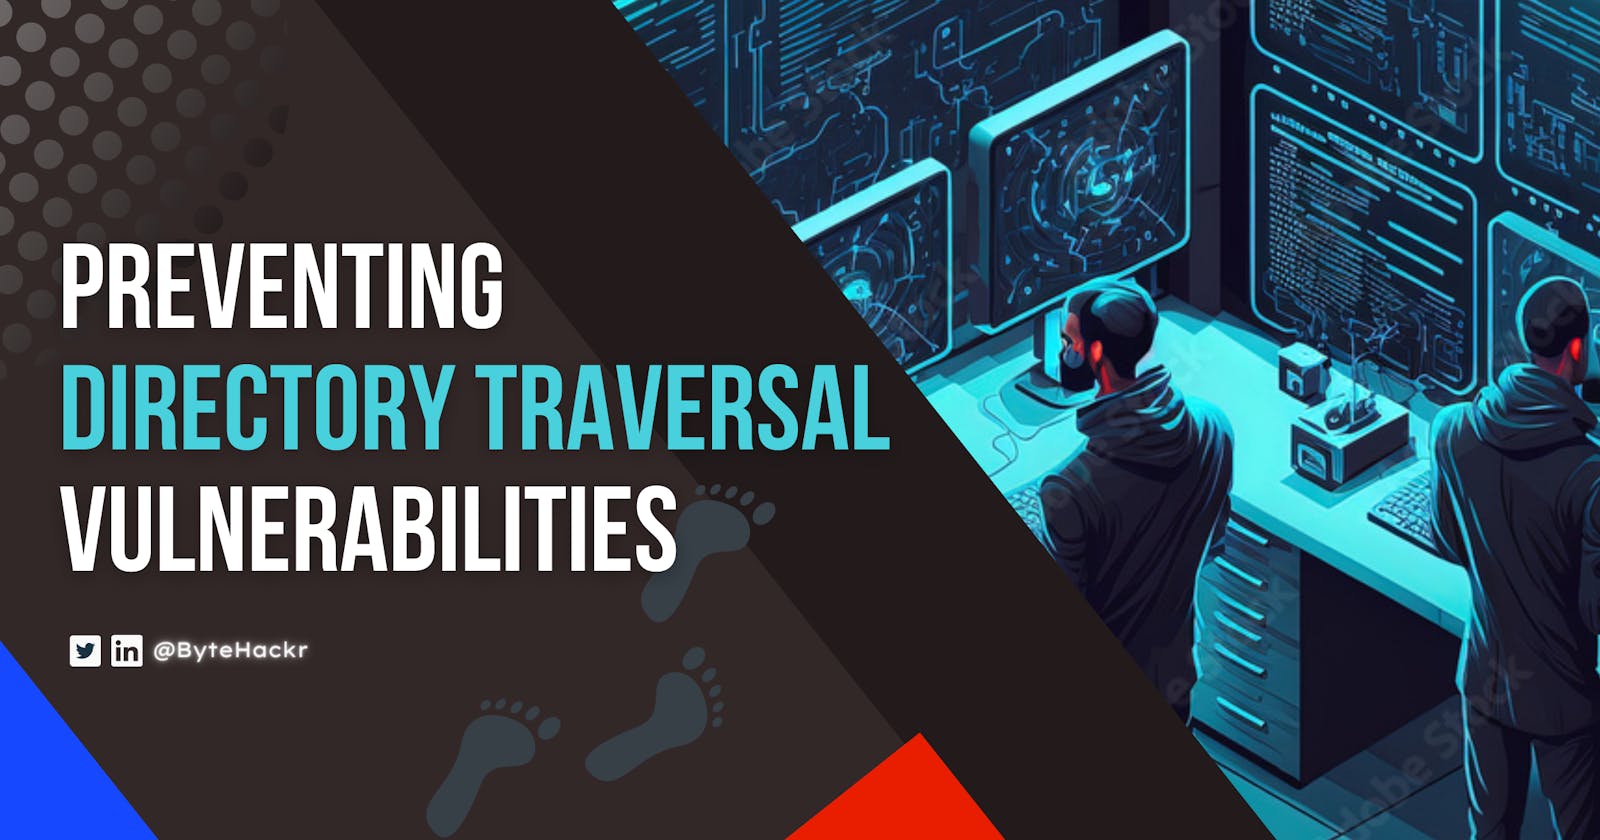 5 Effective Ways to Prevent Directory Traversal